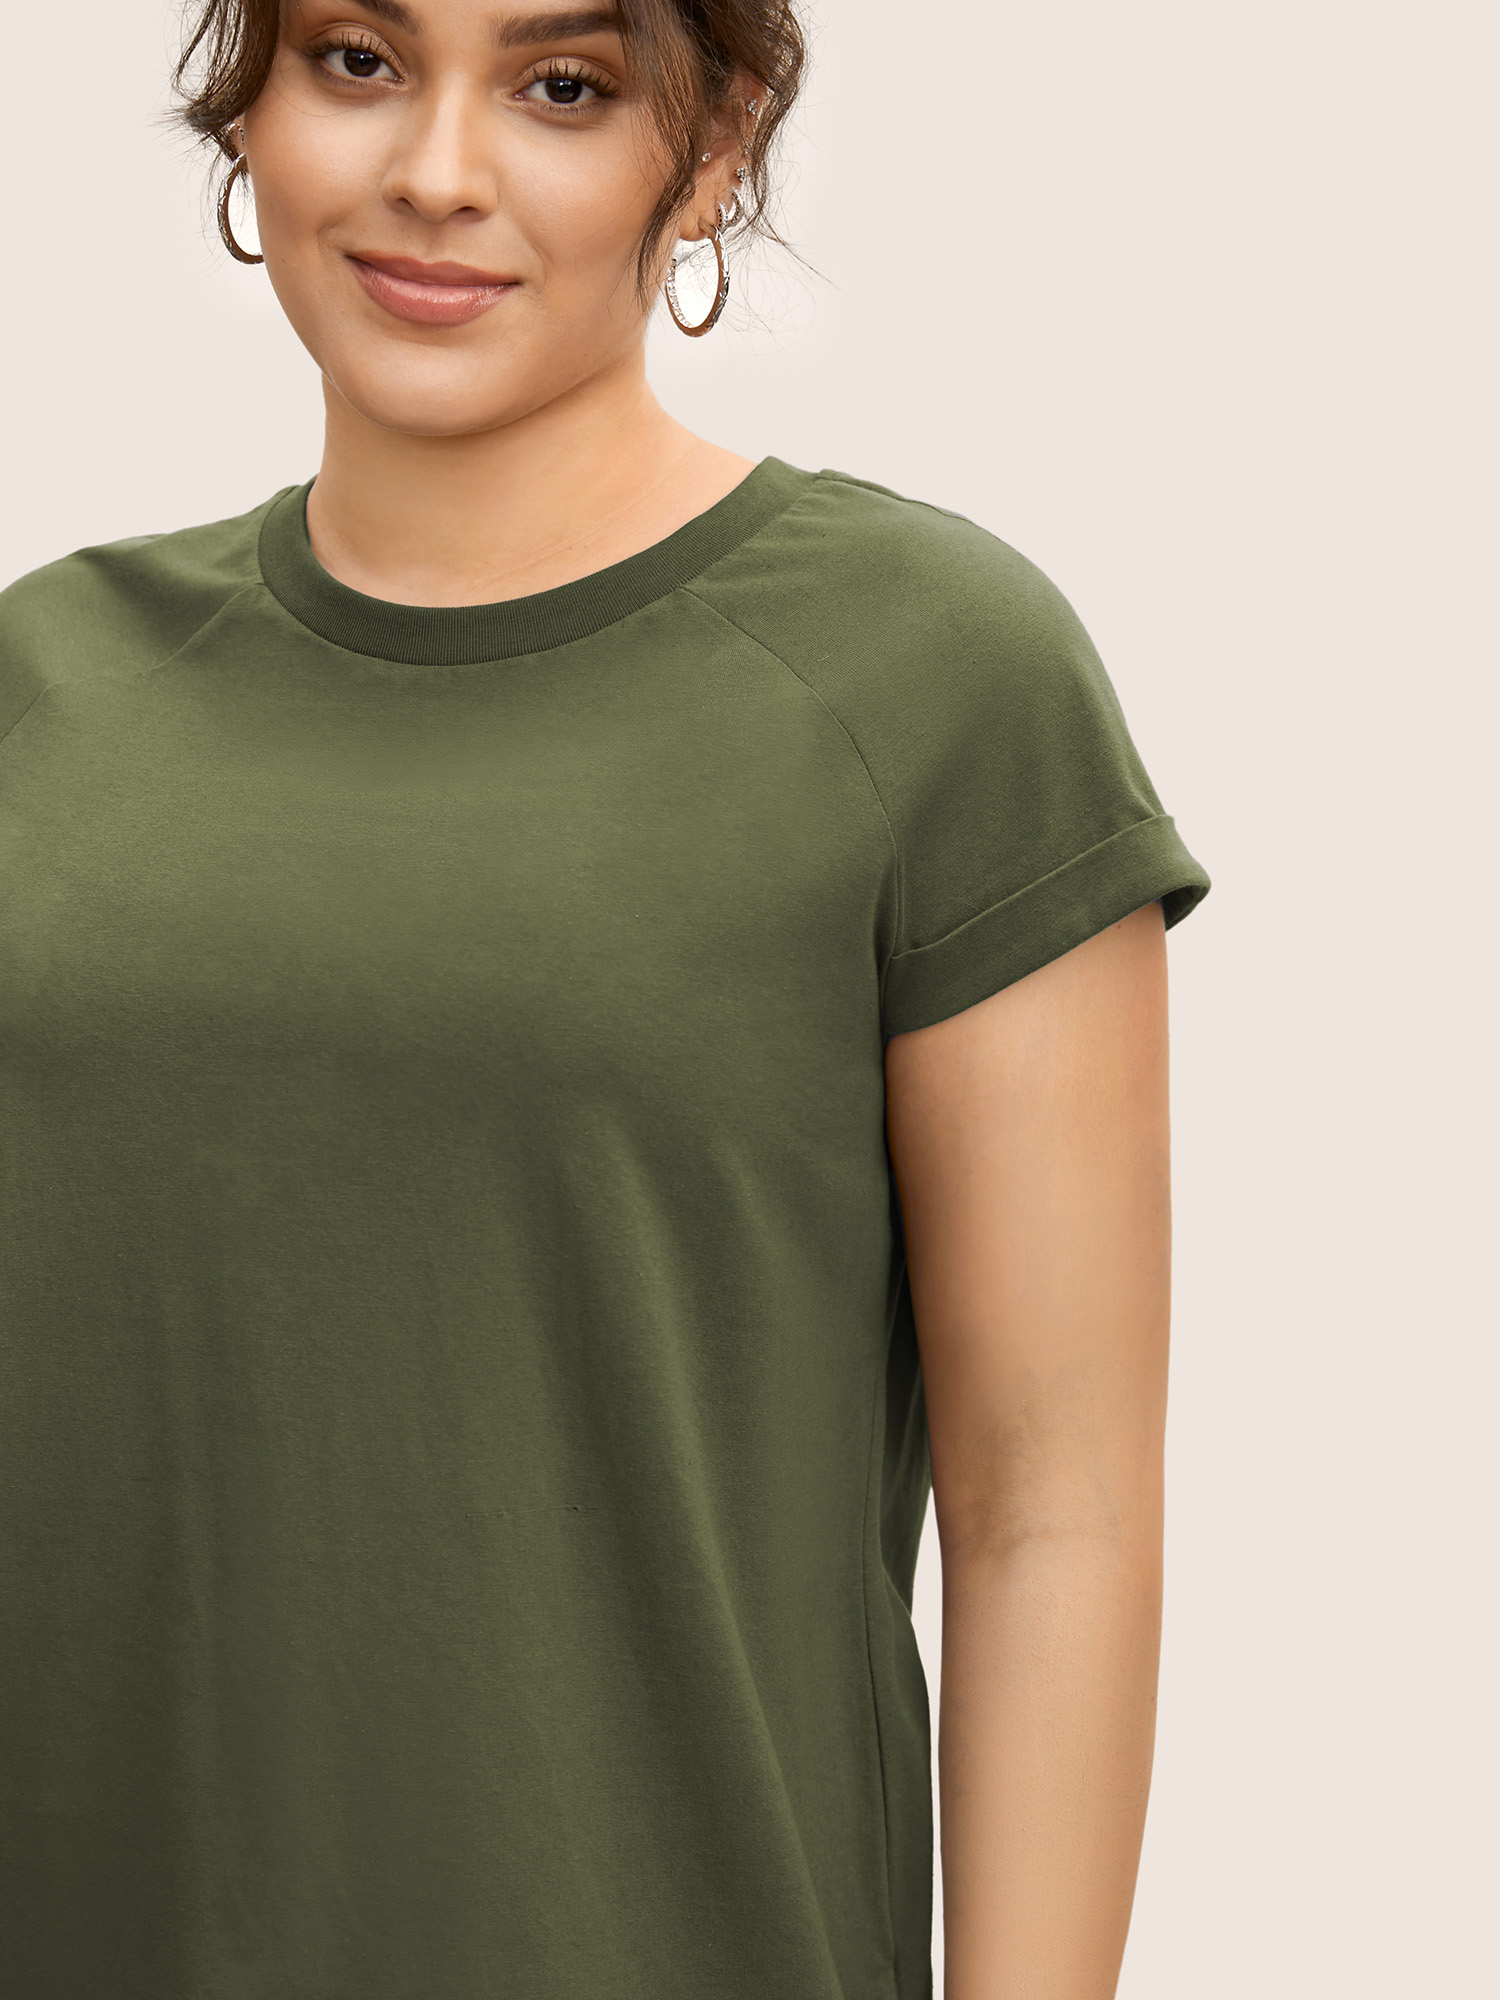 

Plus Size Cotton Solid Crew Neck Roll Sleeve T-shirt ArmyGreen Women Casual Roll Hem Round Neck Everyday T-shirts BloomChic